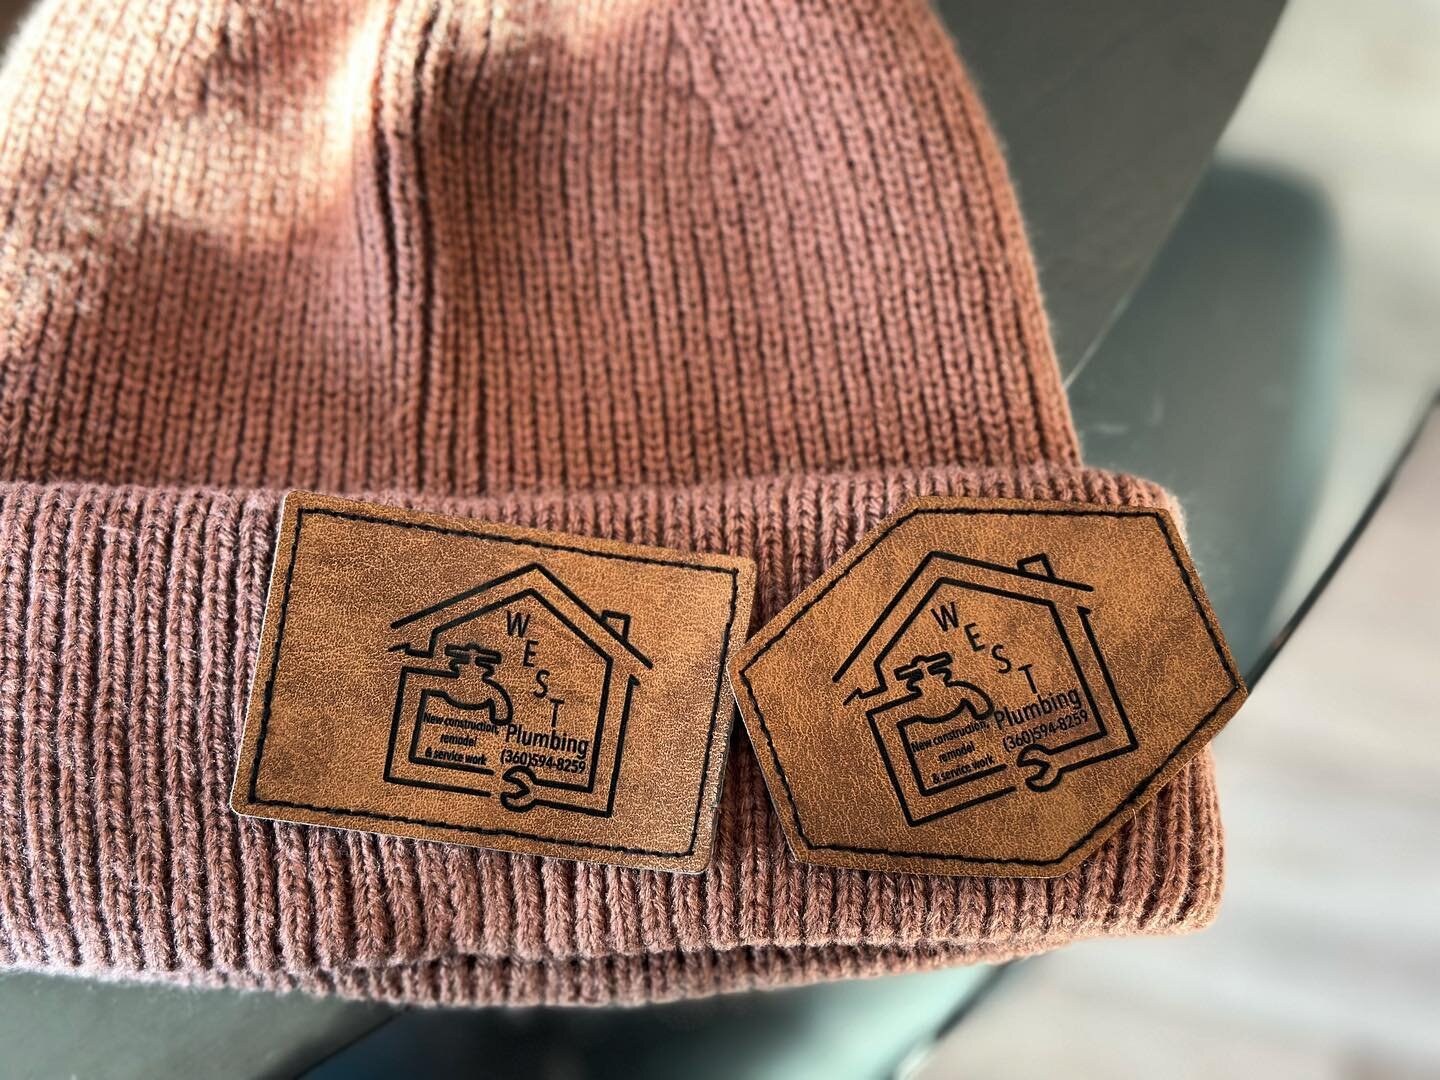 Made some cool patches for West plumbing! Getting the hats in soon then this order will be done✔️. #smallbusiness #localbusiness #localssupportinglocals #blockhousemarket #westplumbingwhidbey #leatherpatch